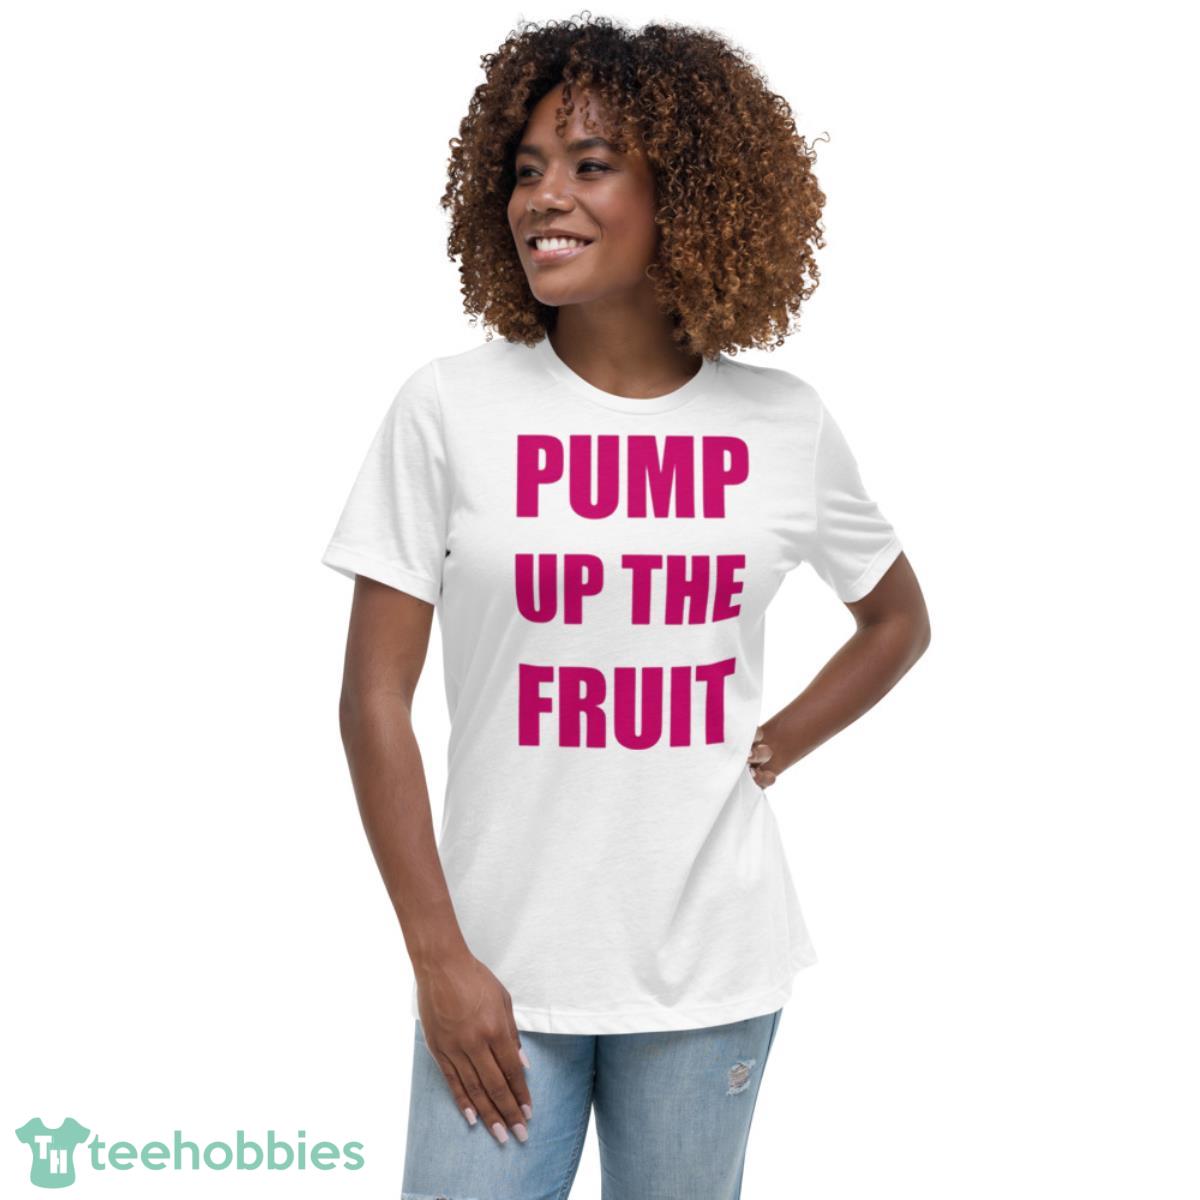 iCarly - Pump Up The Fruit Girls Youth T-Shirt 